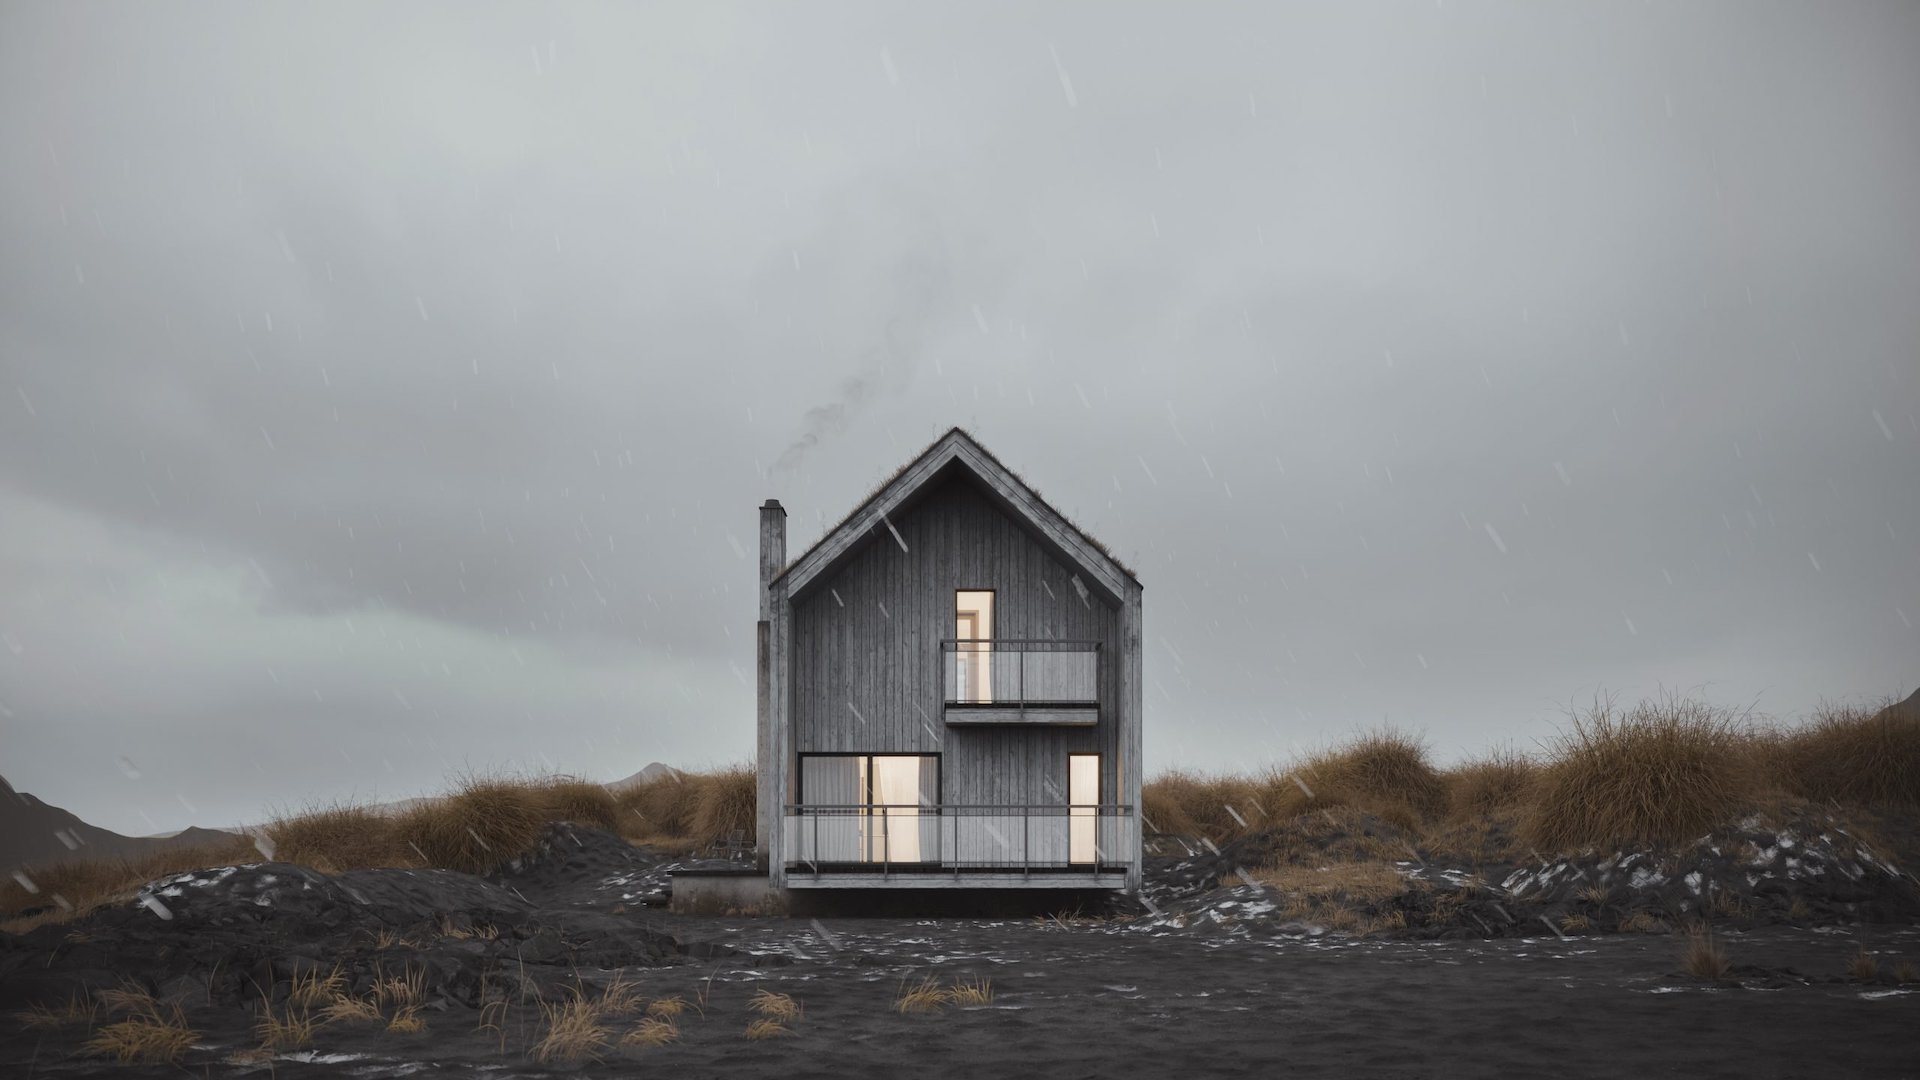 3D Architectural Rendering of a House in Rainy Weather